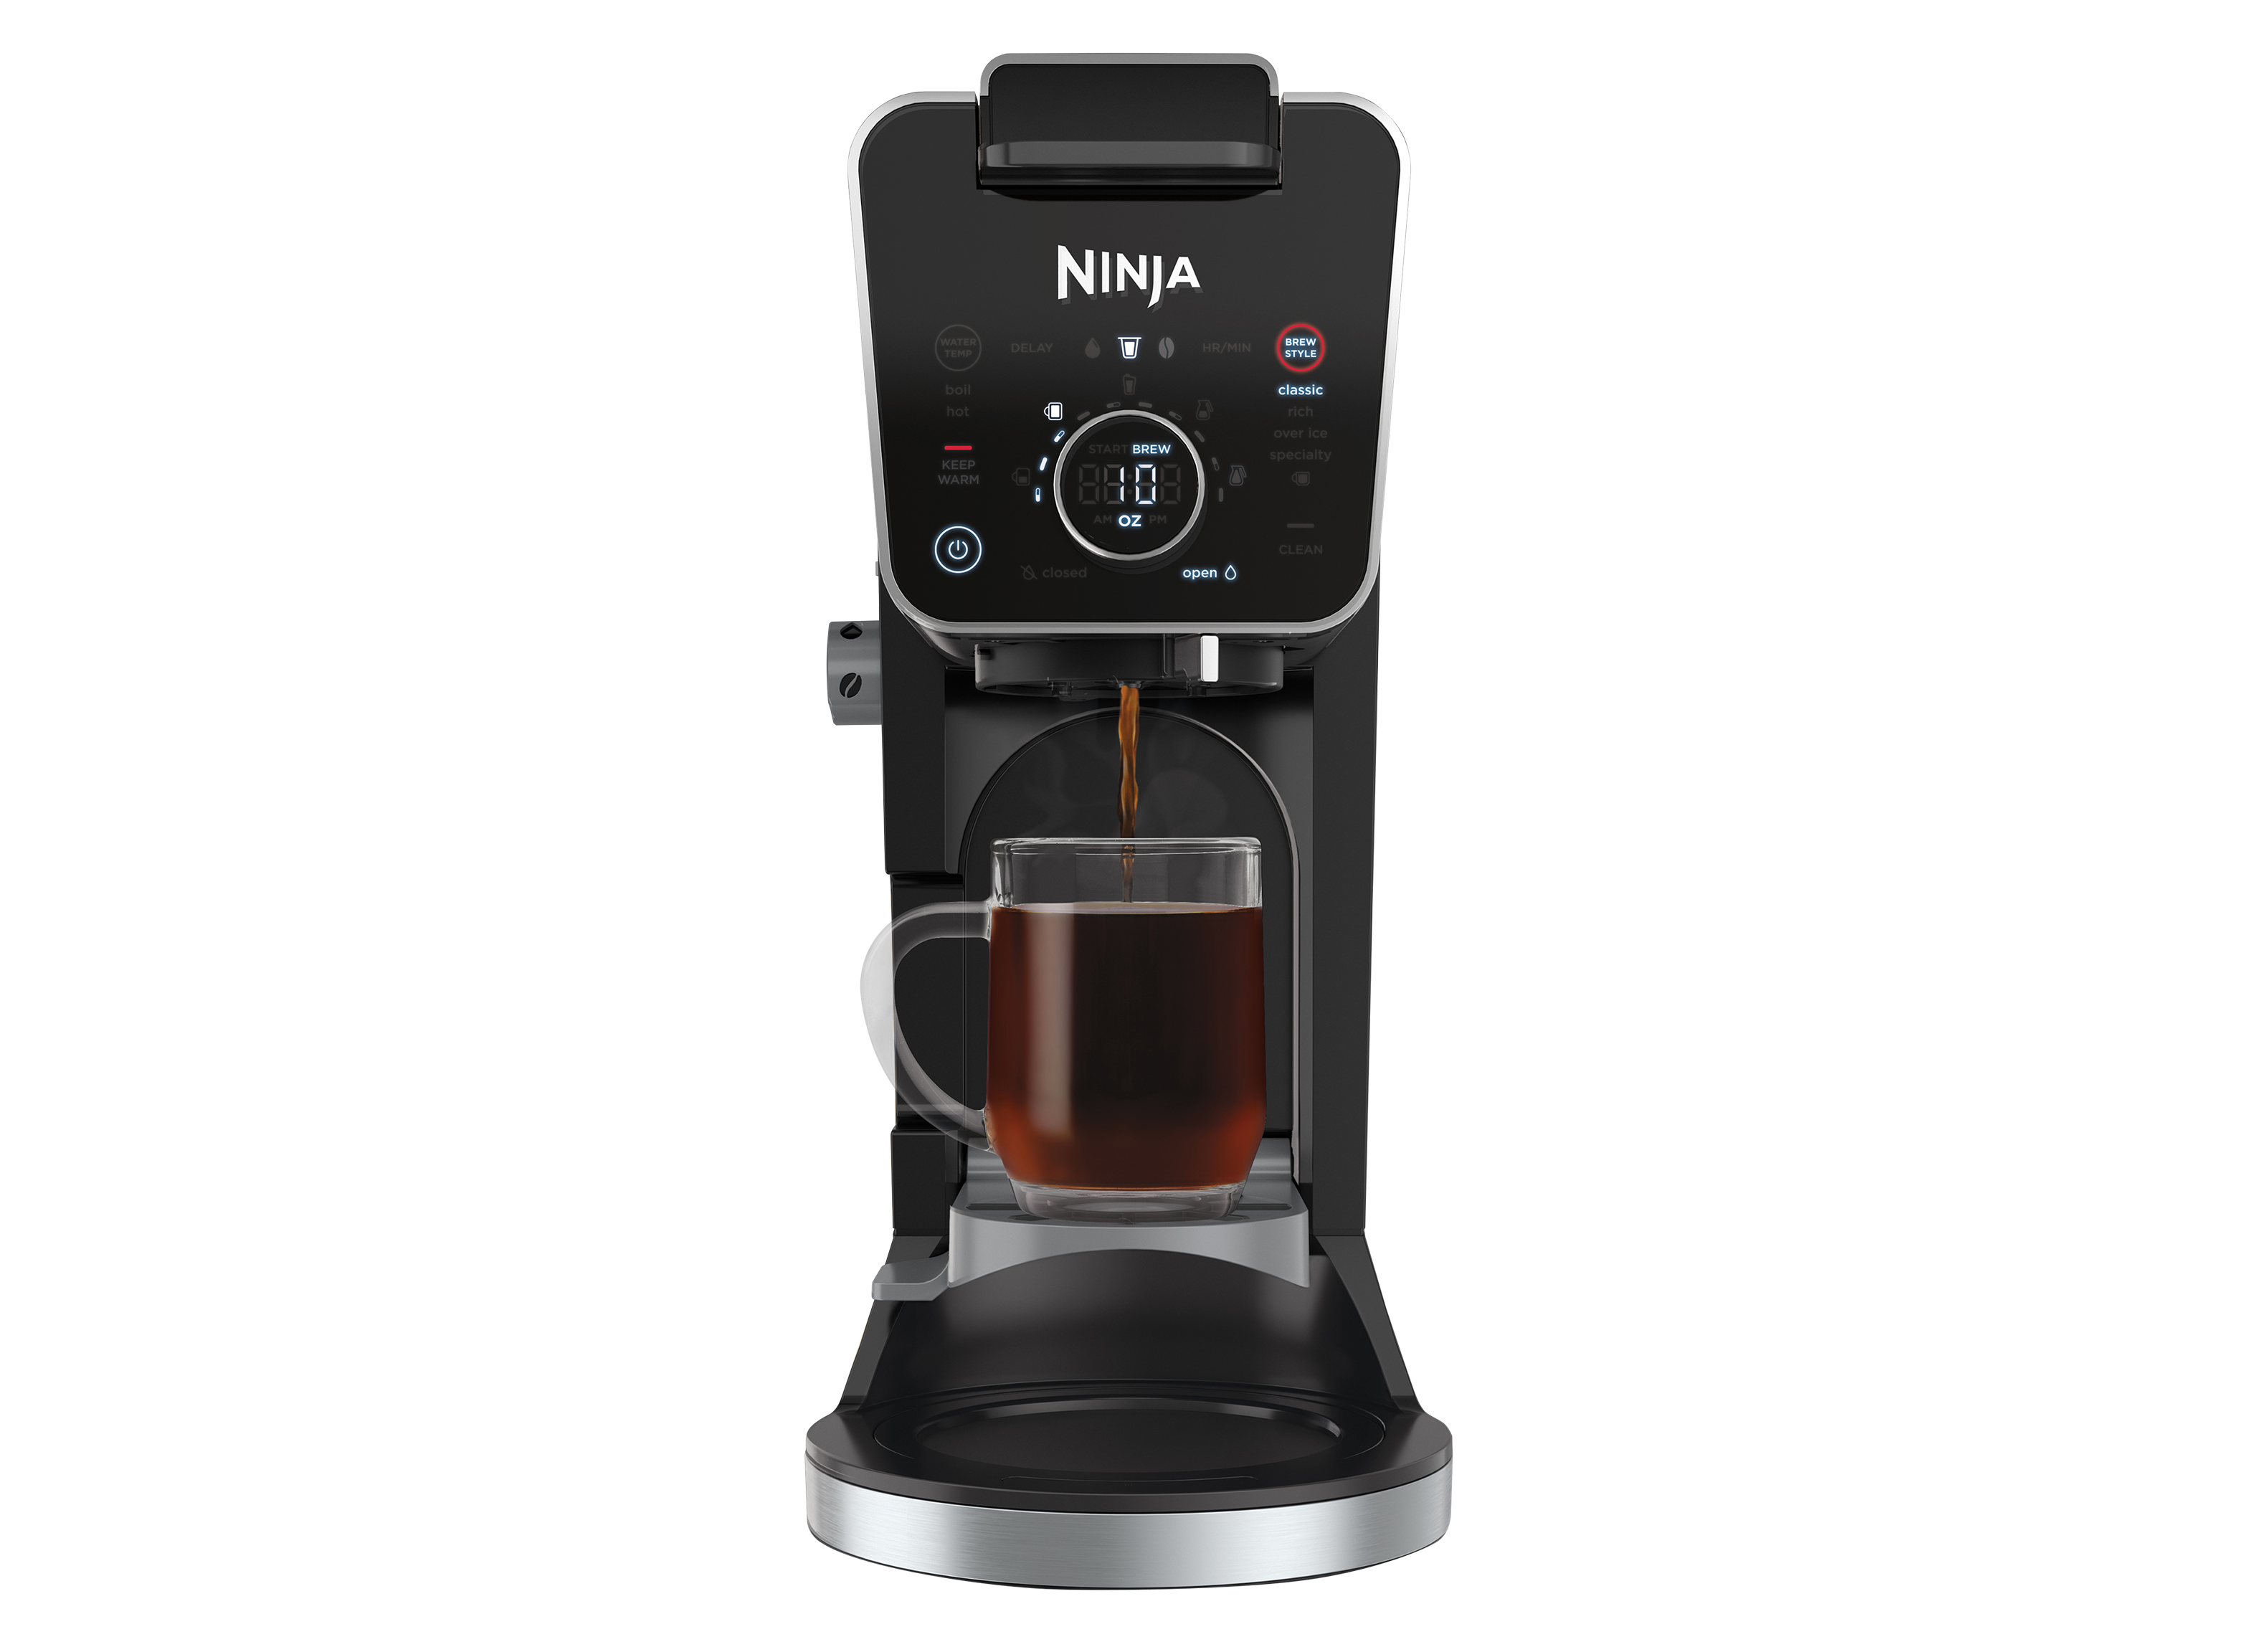 https://crdms.images.consumerreports.org/prod/products/cr/models/412815-dual-coffee-makers-ninja-dualbrew-pro-12-cup-cfp301-10037415.png